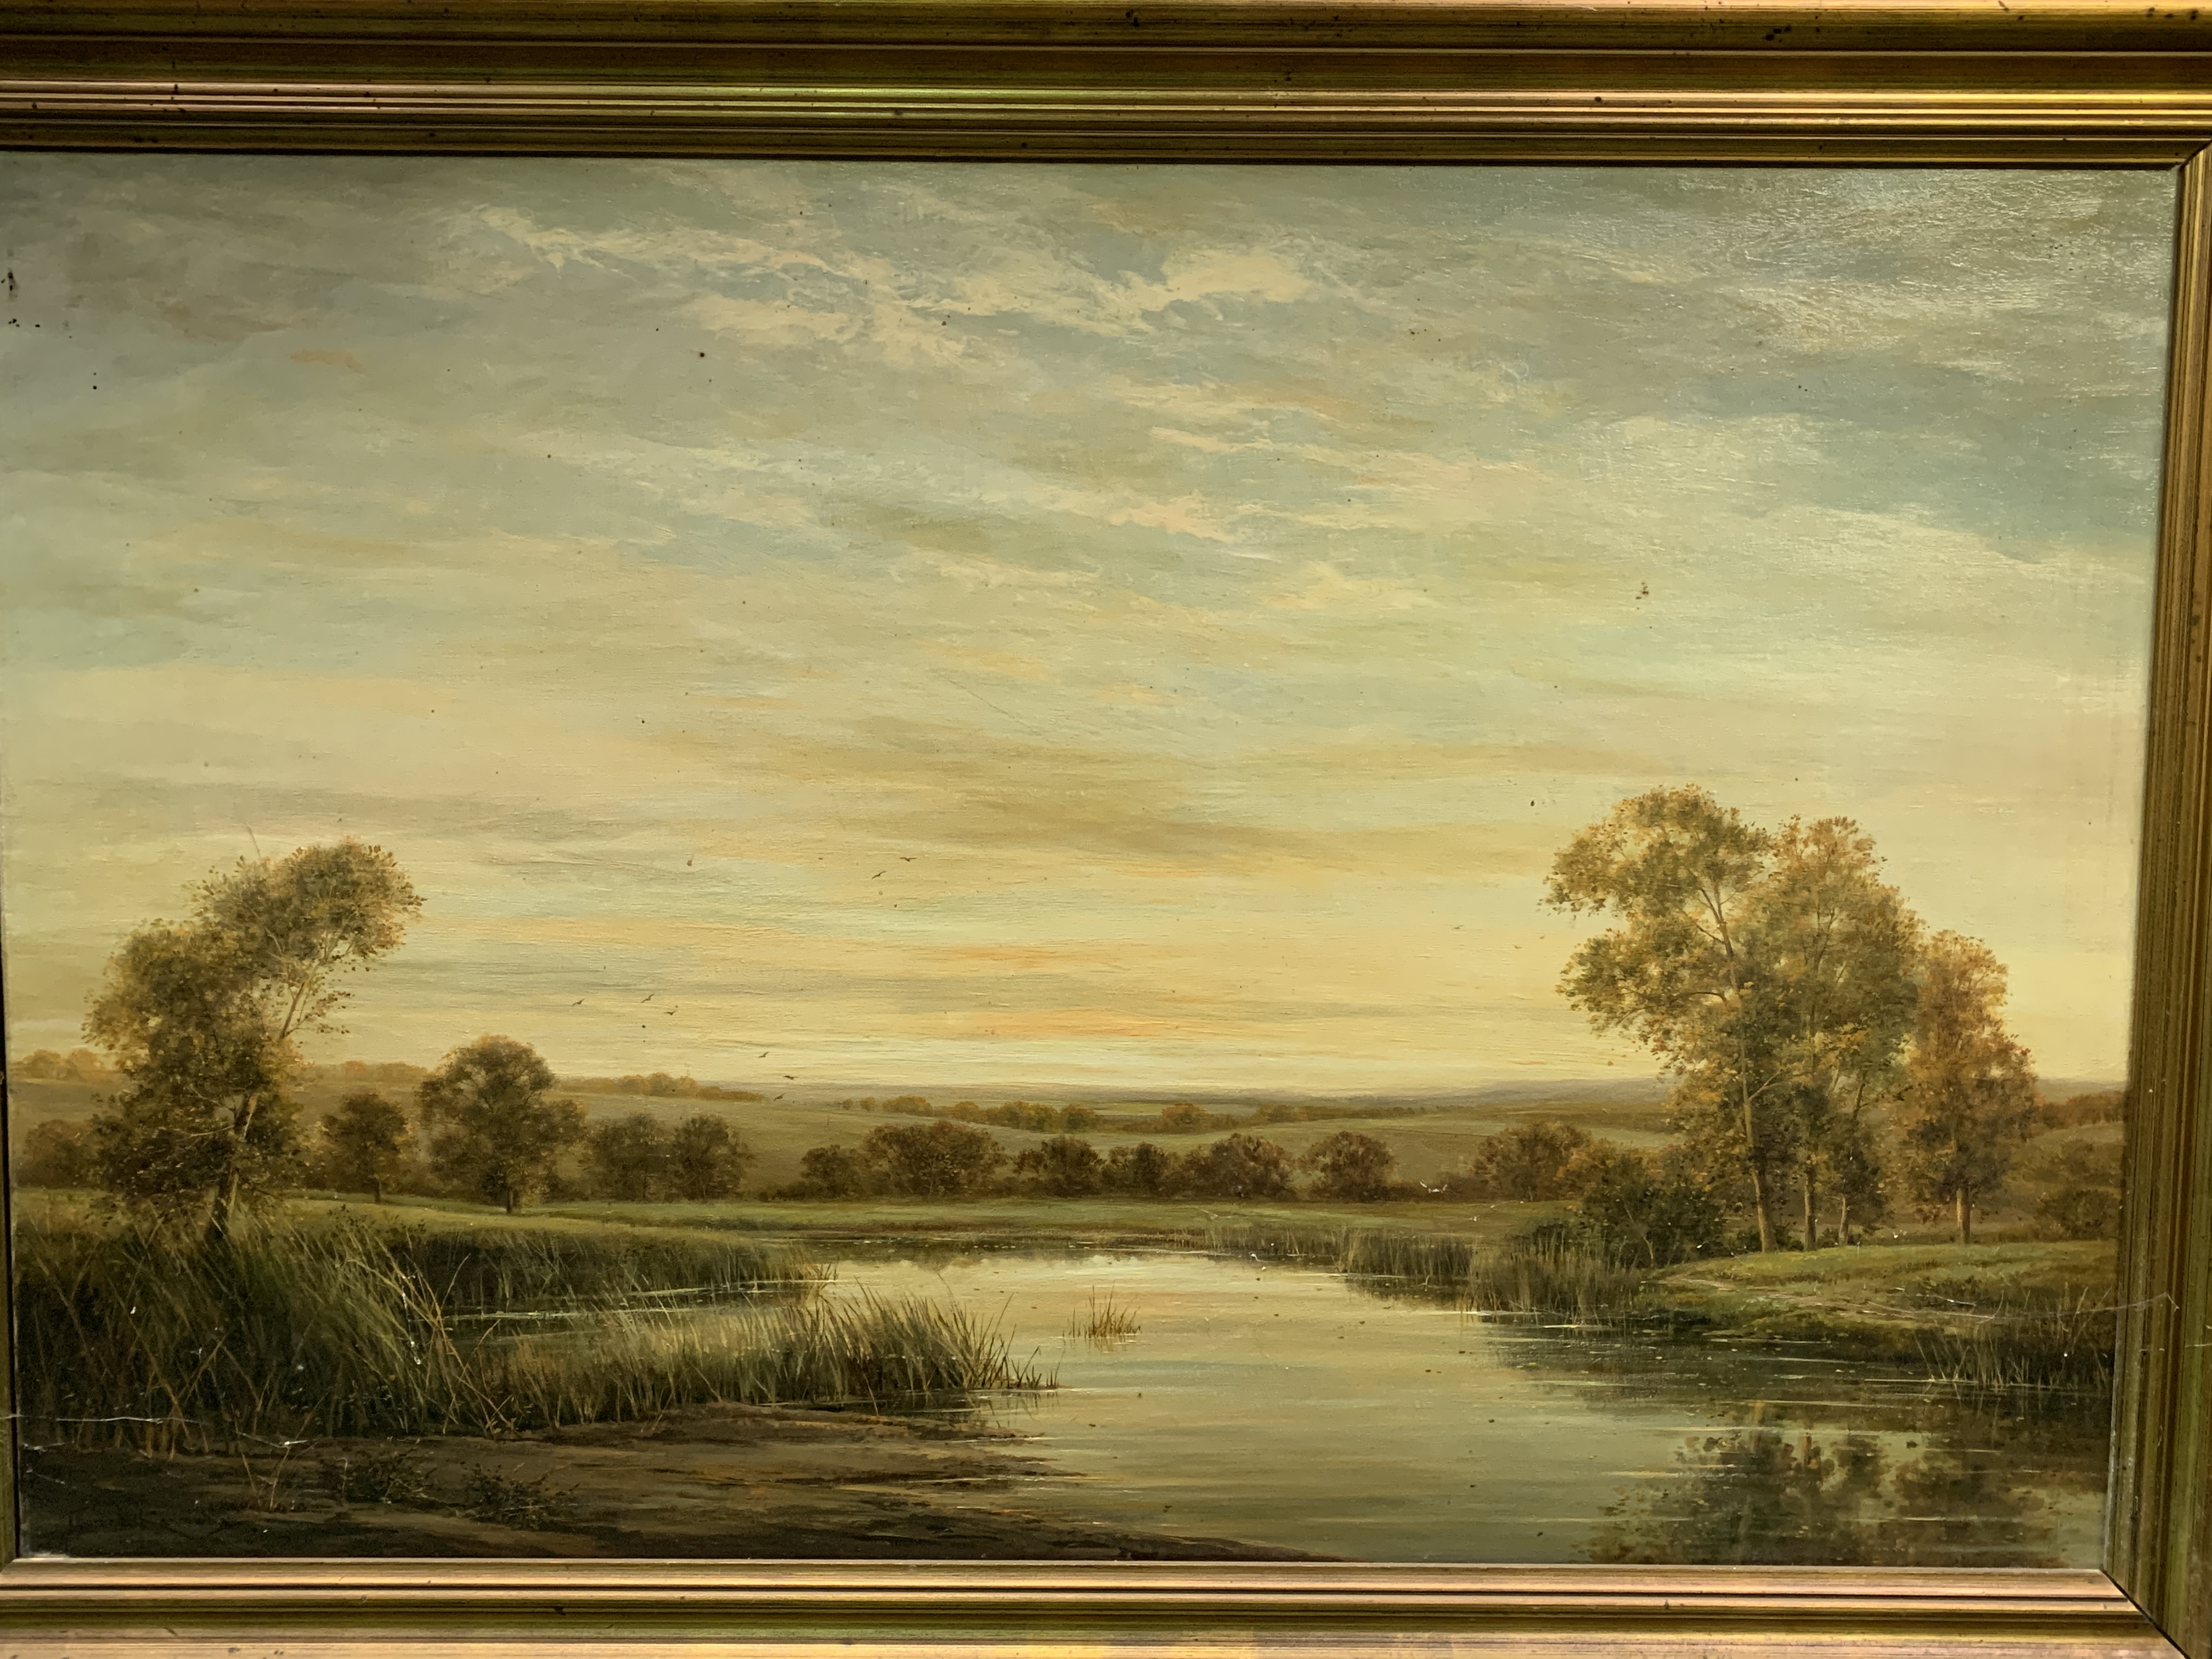 Gilt framed oil on canvas of a river and landscape, written on reverse "On the River Kennett" - Image 4 of 5